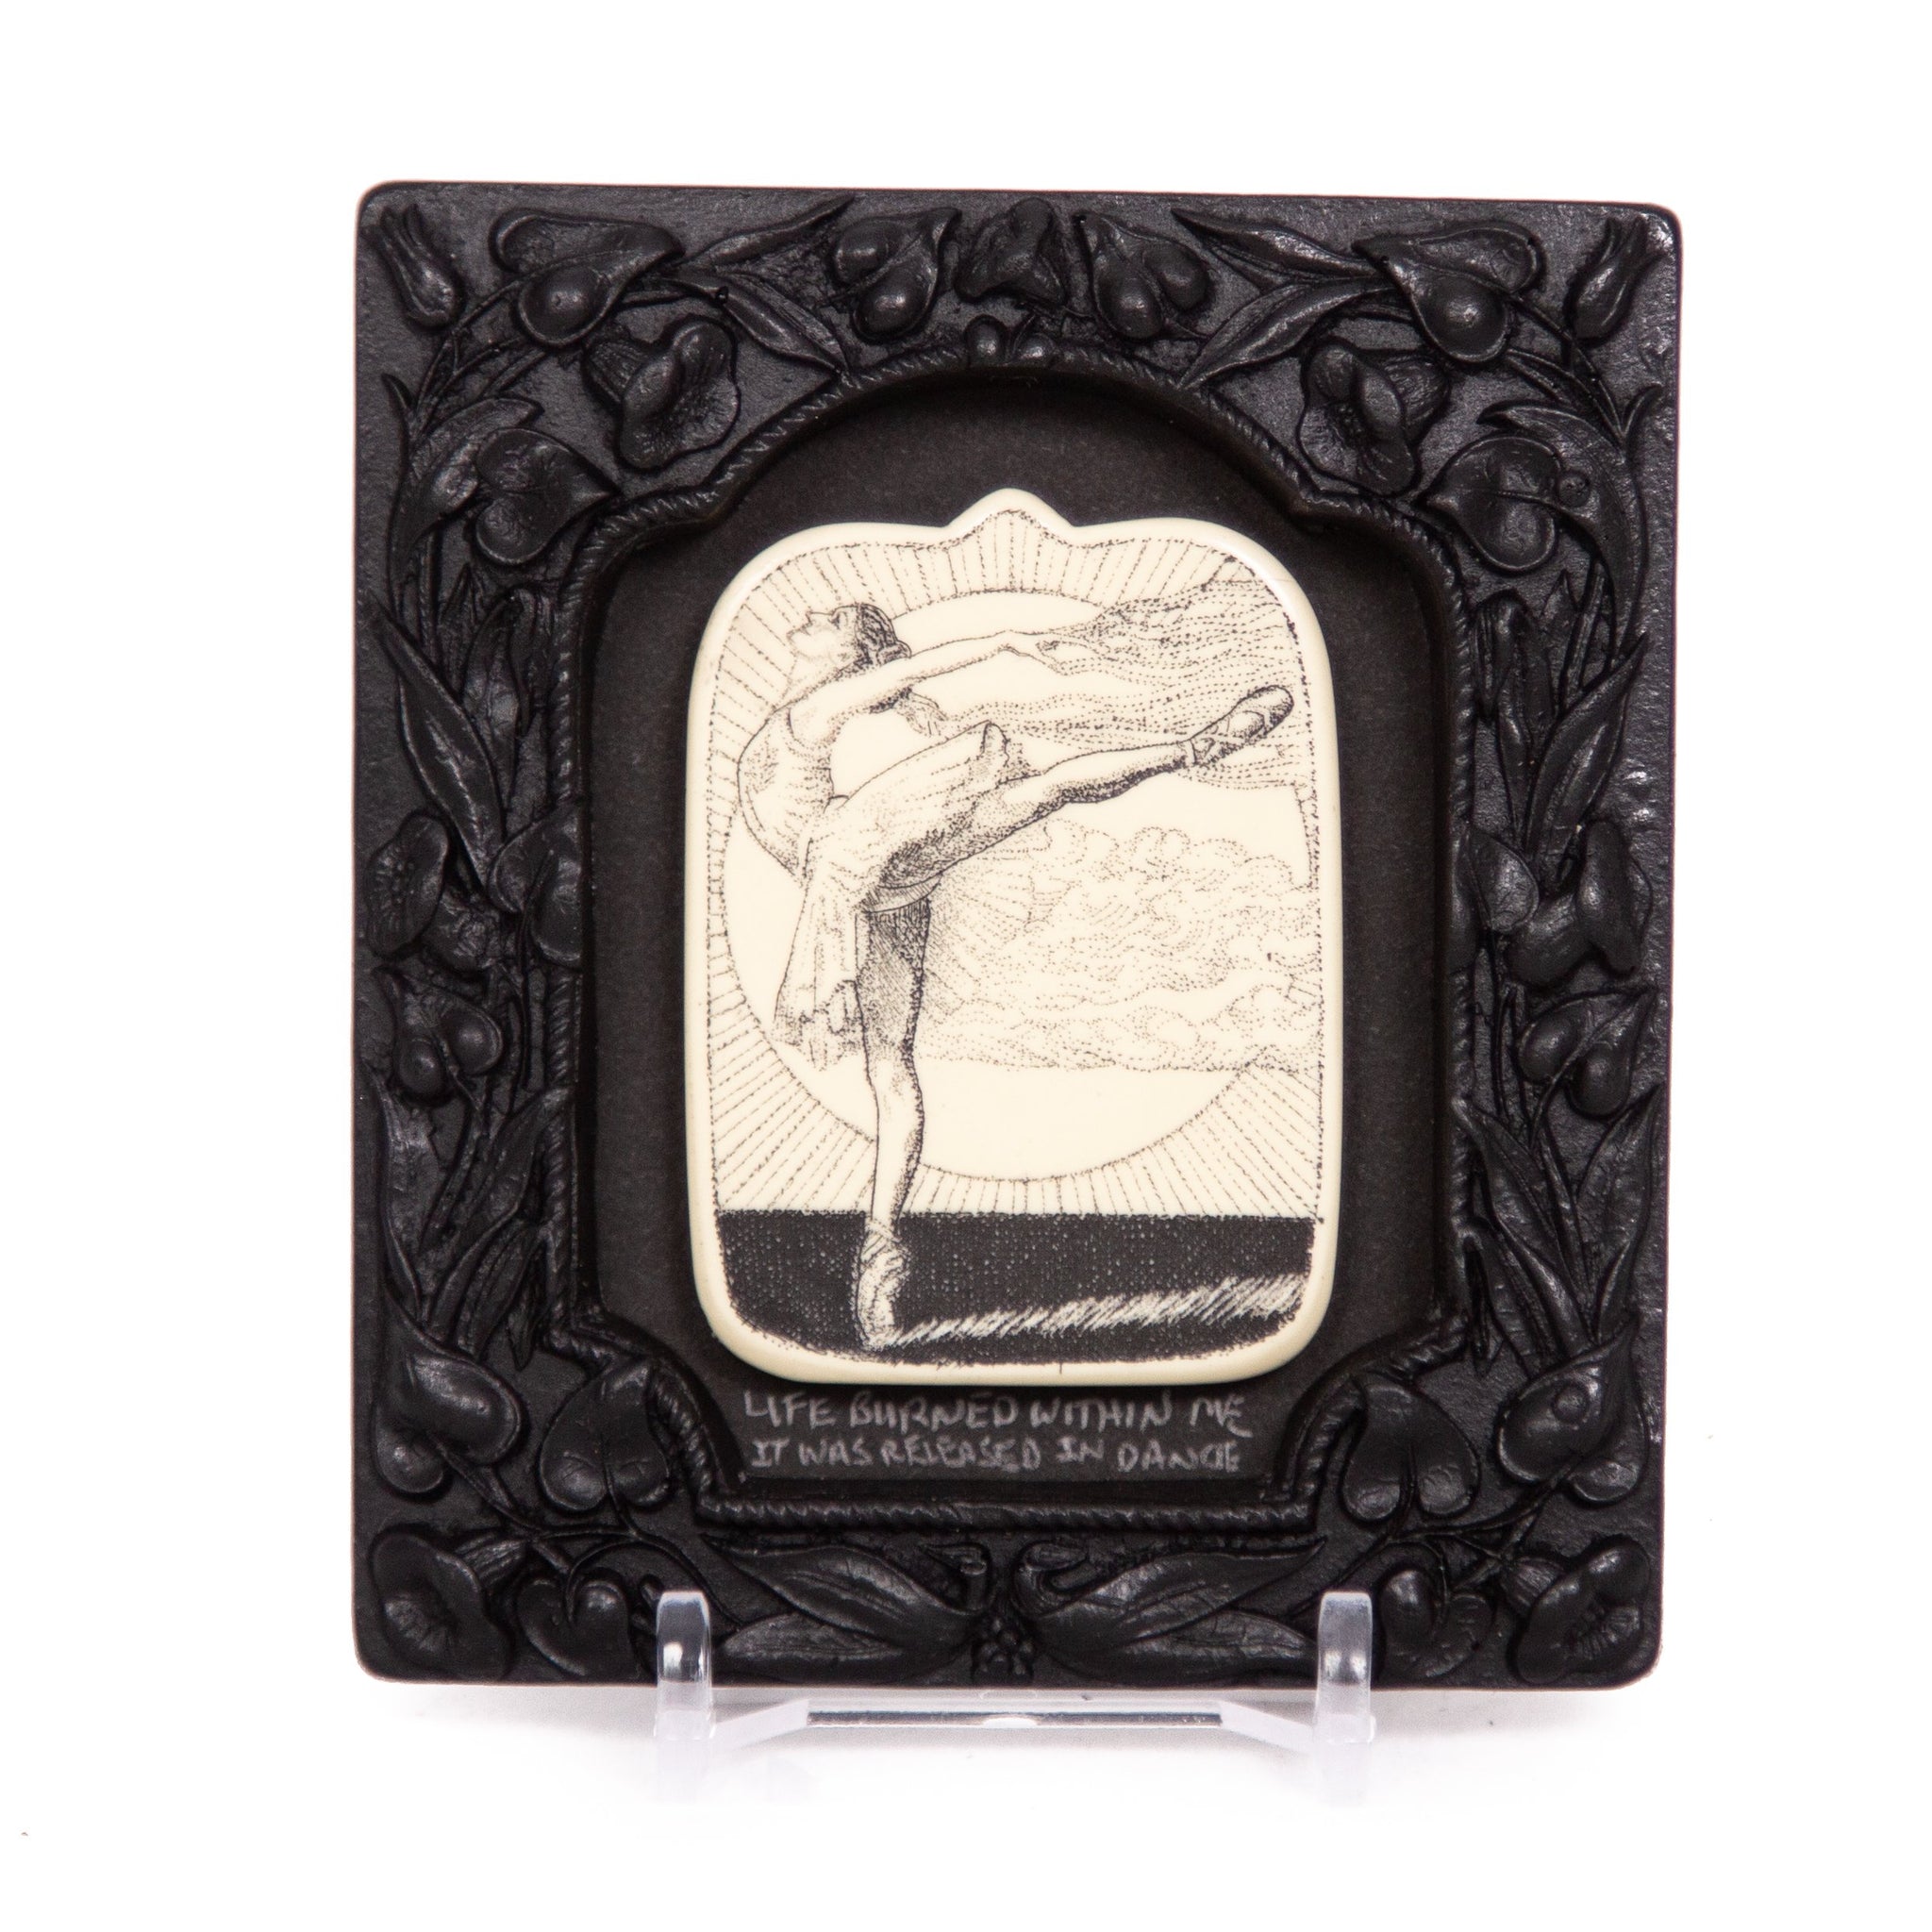 "Life Burned Within Me it was Released in Dance" Small Chip Carved Frame